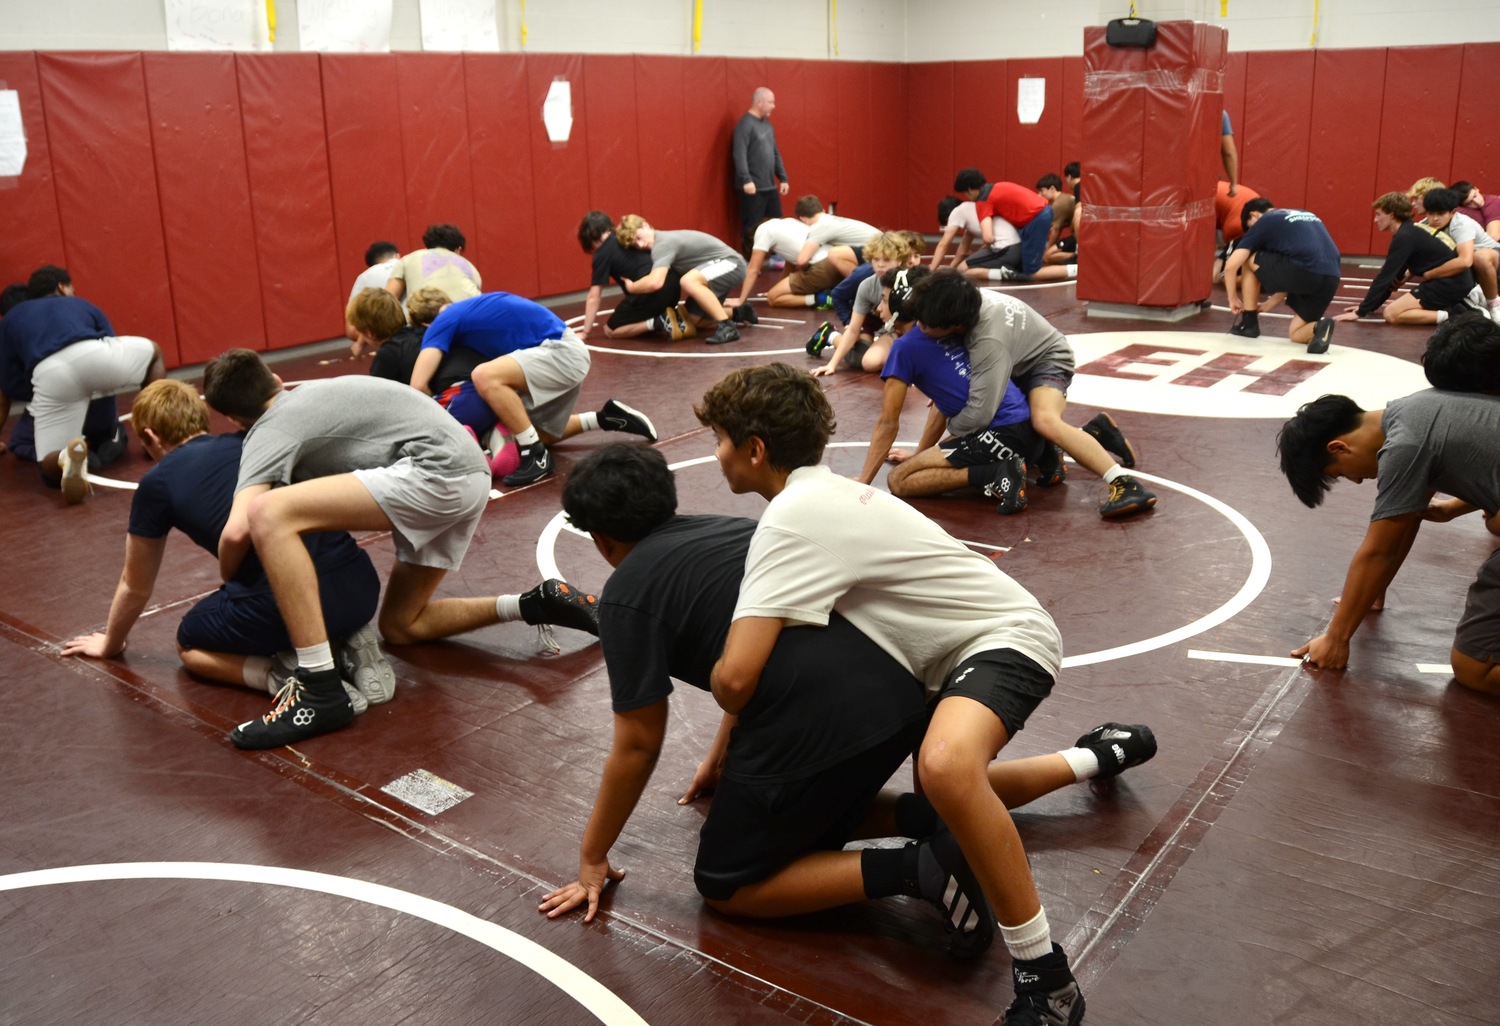 The East Hampton/Pierson wrestling team practices Monday.   KYRIL BROMLEY